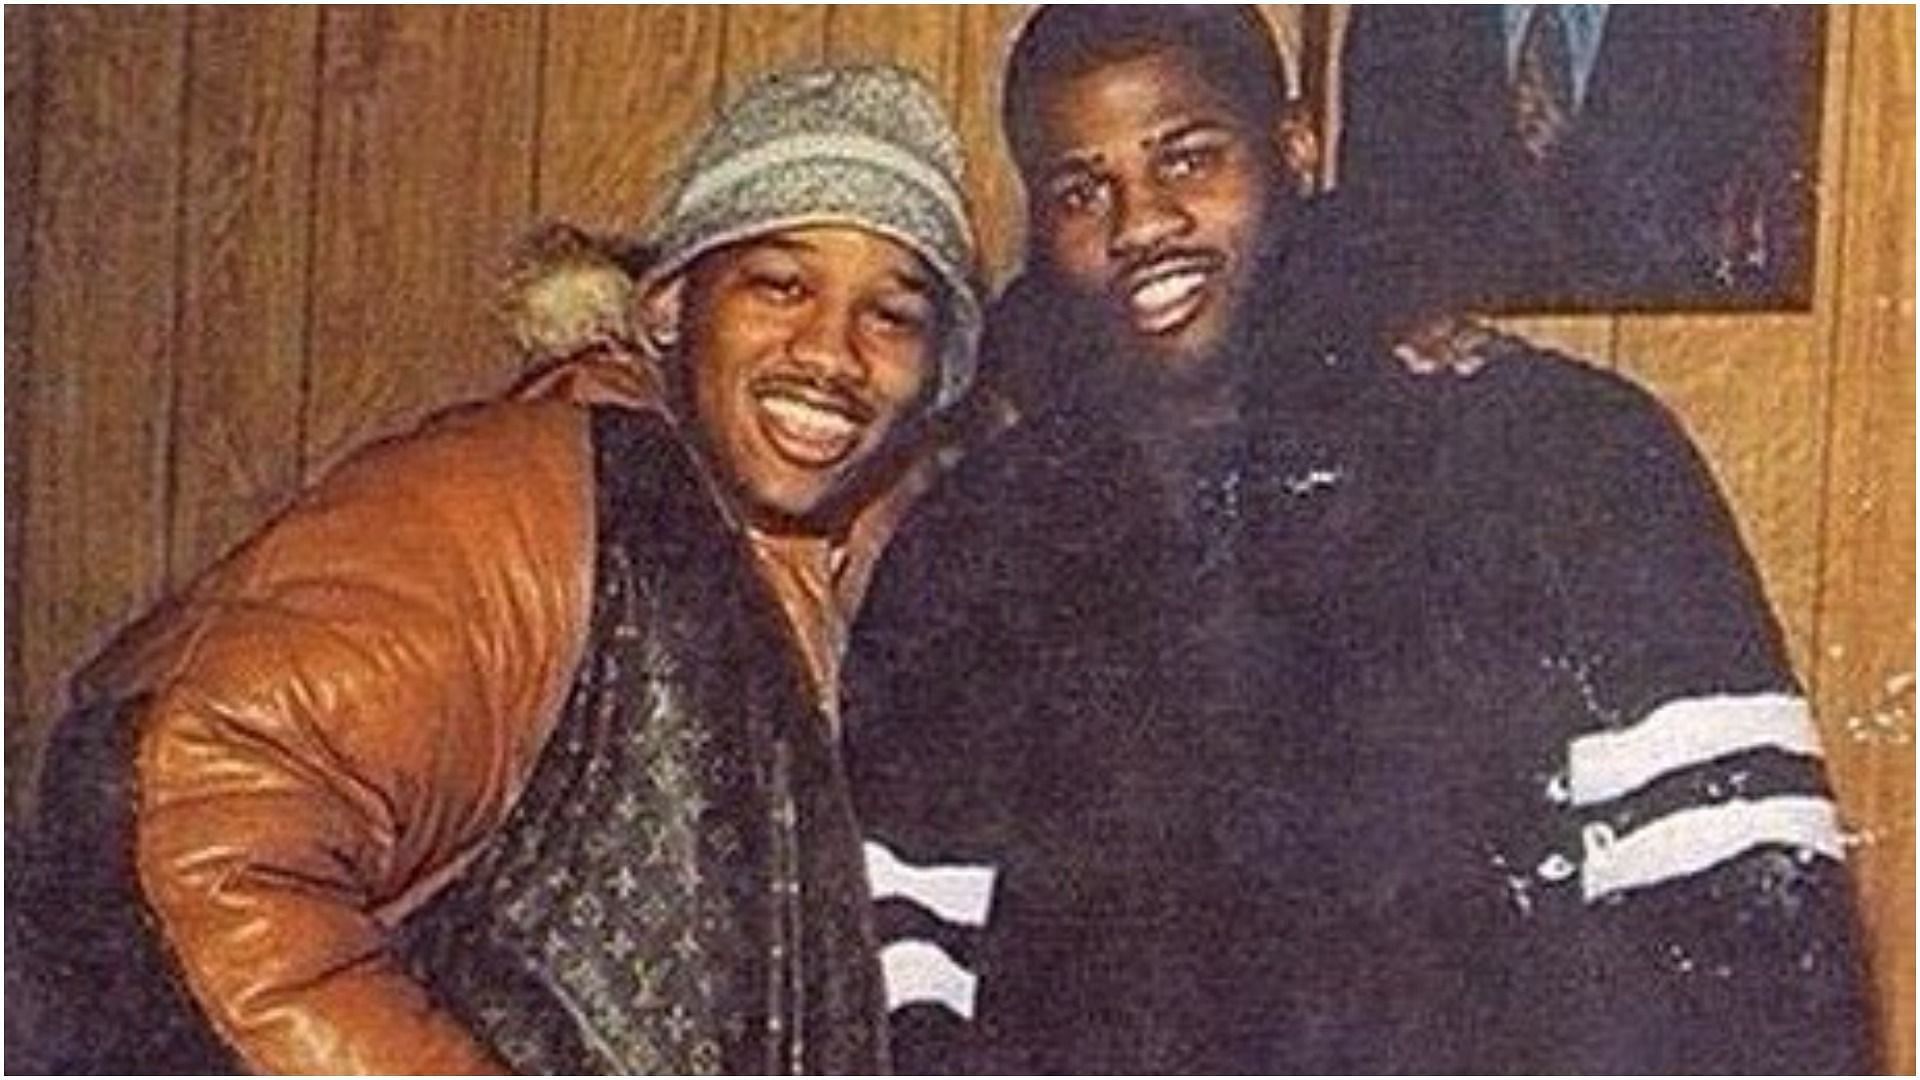 Alpo Martinez was killed over a minor traffic incident, police say